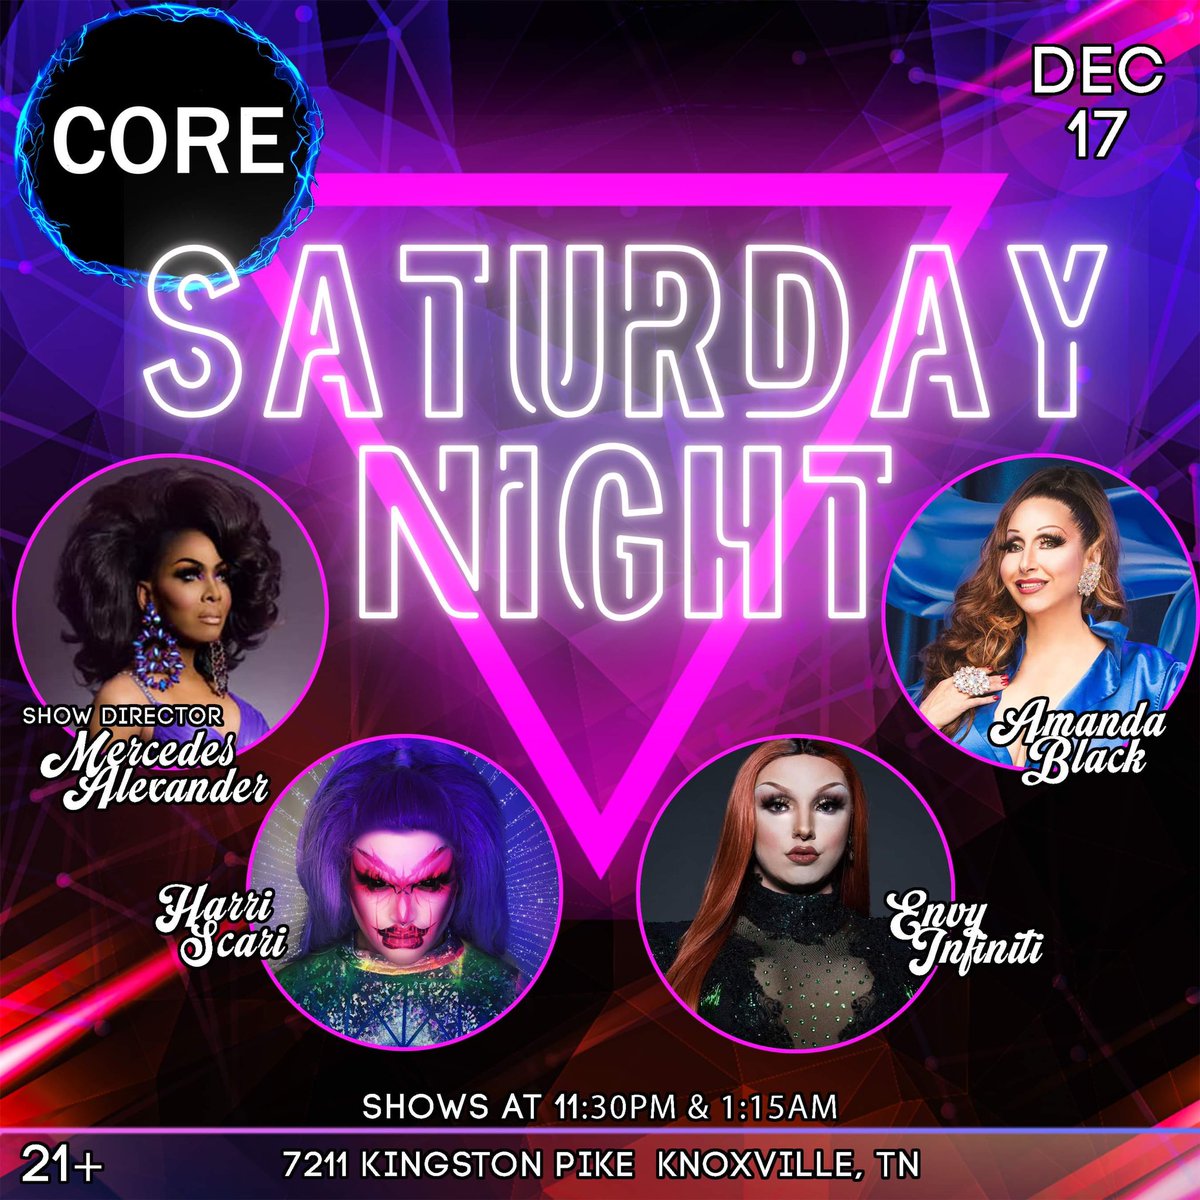 Saturday night at CORE in Knoxville, Tennessee. Come join us. #knoxvilletn #LGBTQIA #THEmercedesalexander